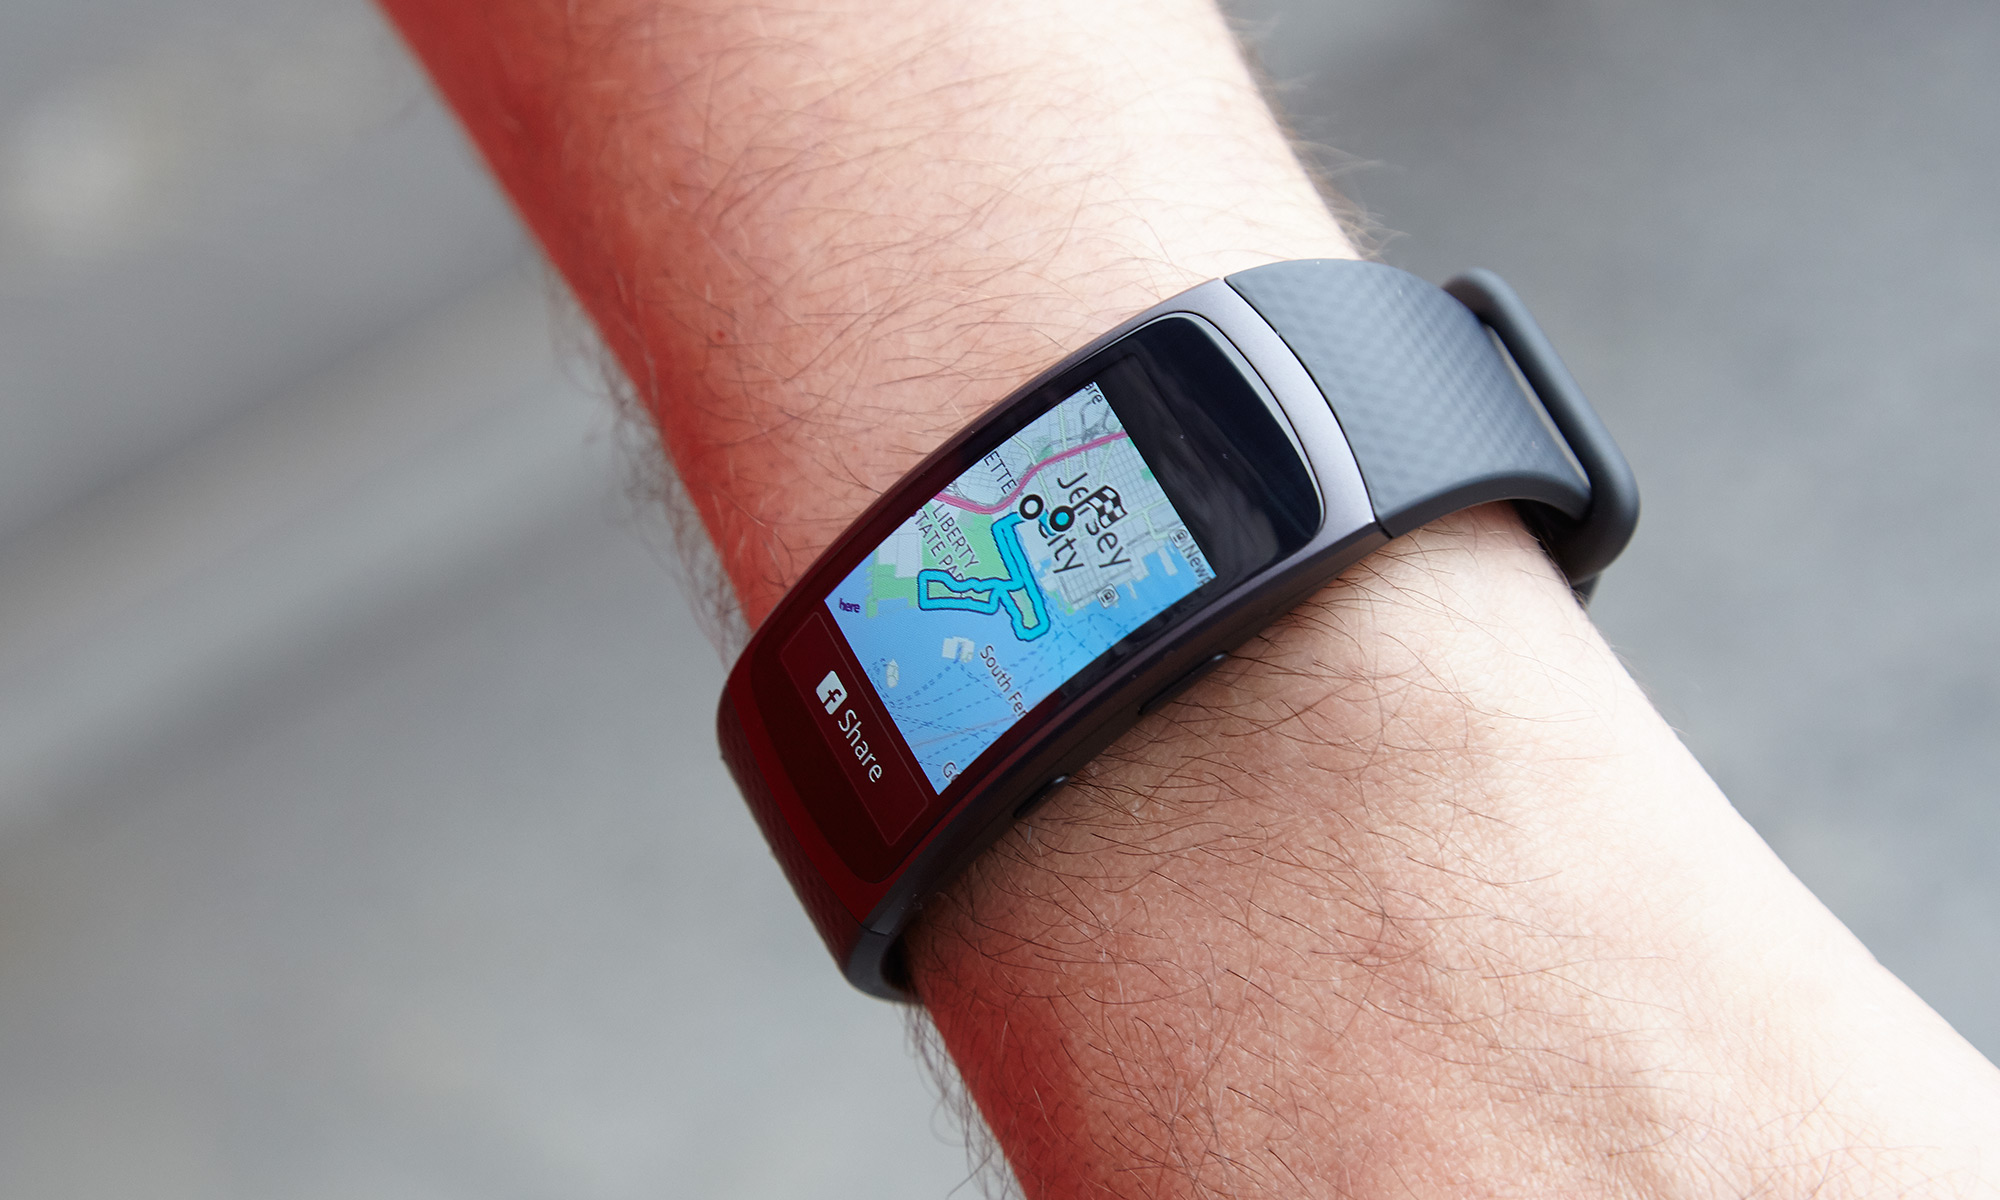 George Hanbury commentator stof in de ogen gooien Samsung Gear Fit 2 Review: Tracker, Watch and Music in One | Tom's Guide